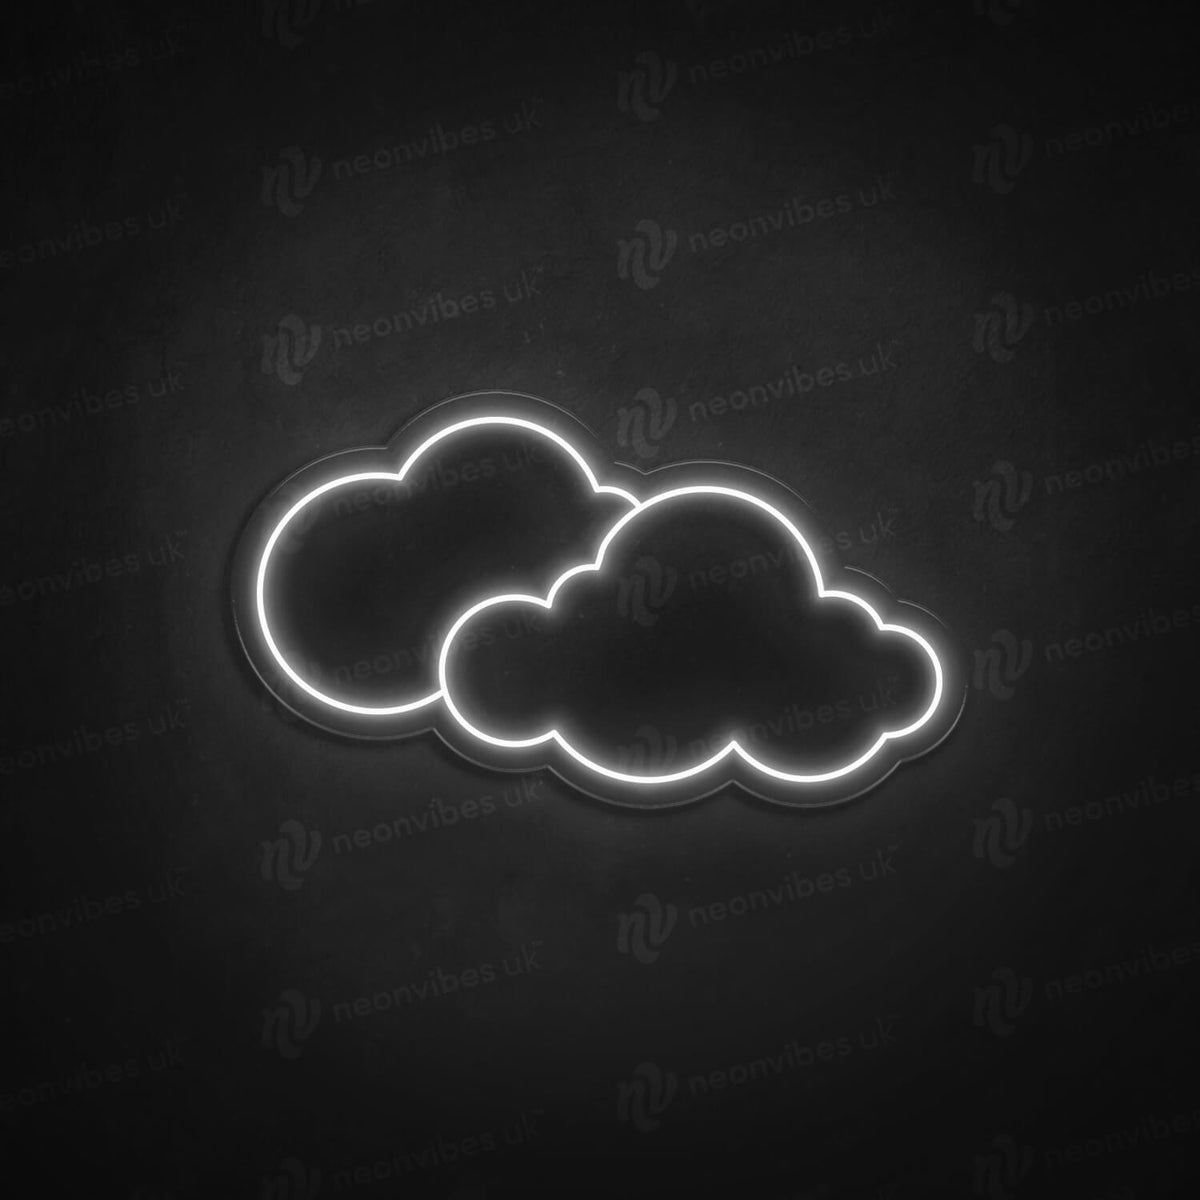 Clouds neon sign - V1